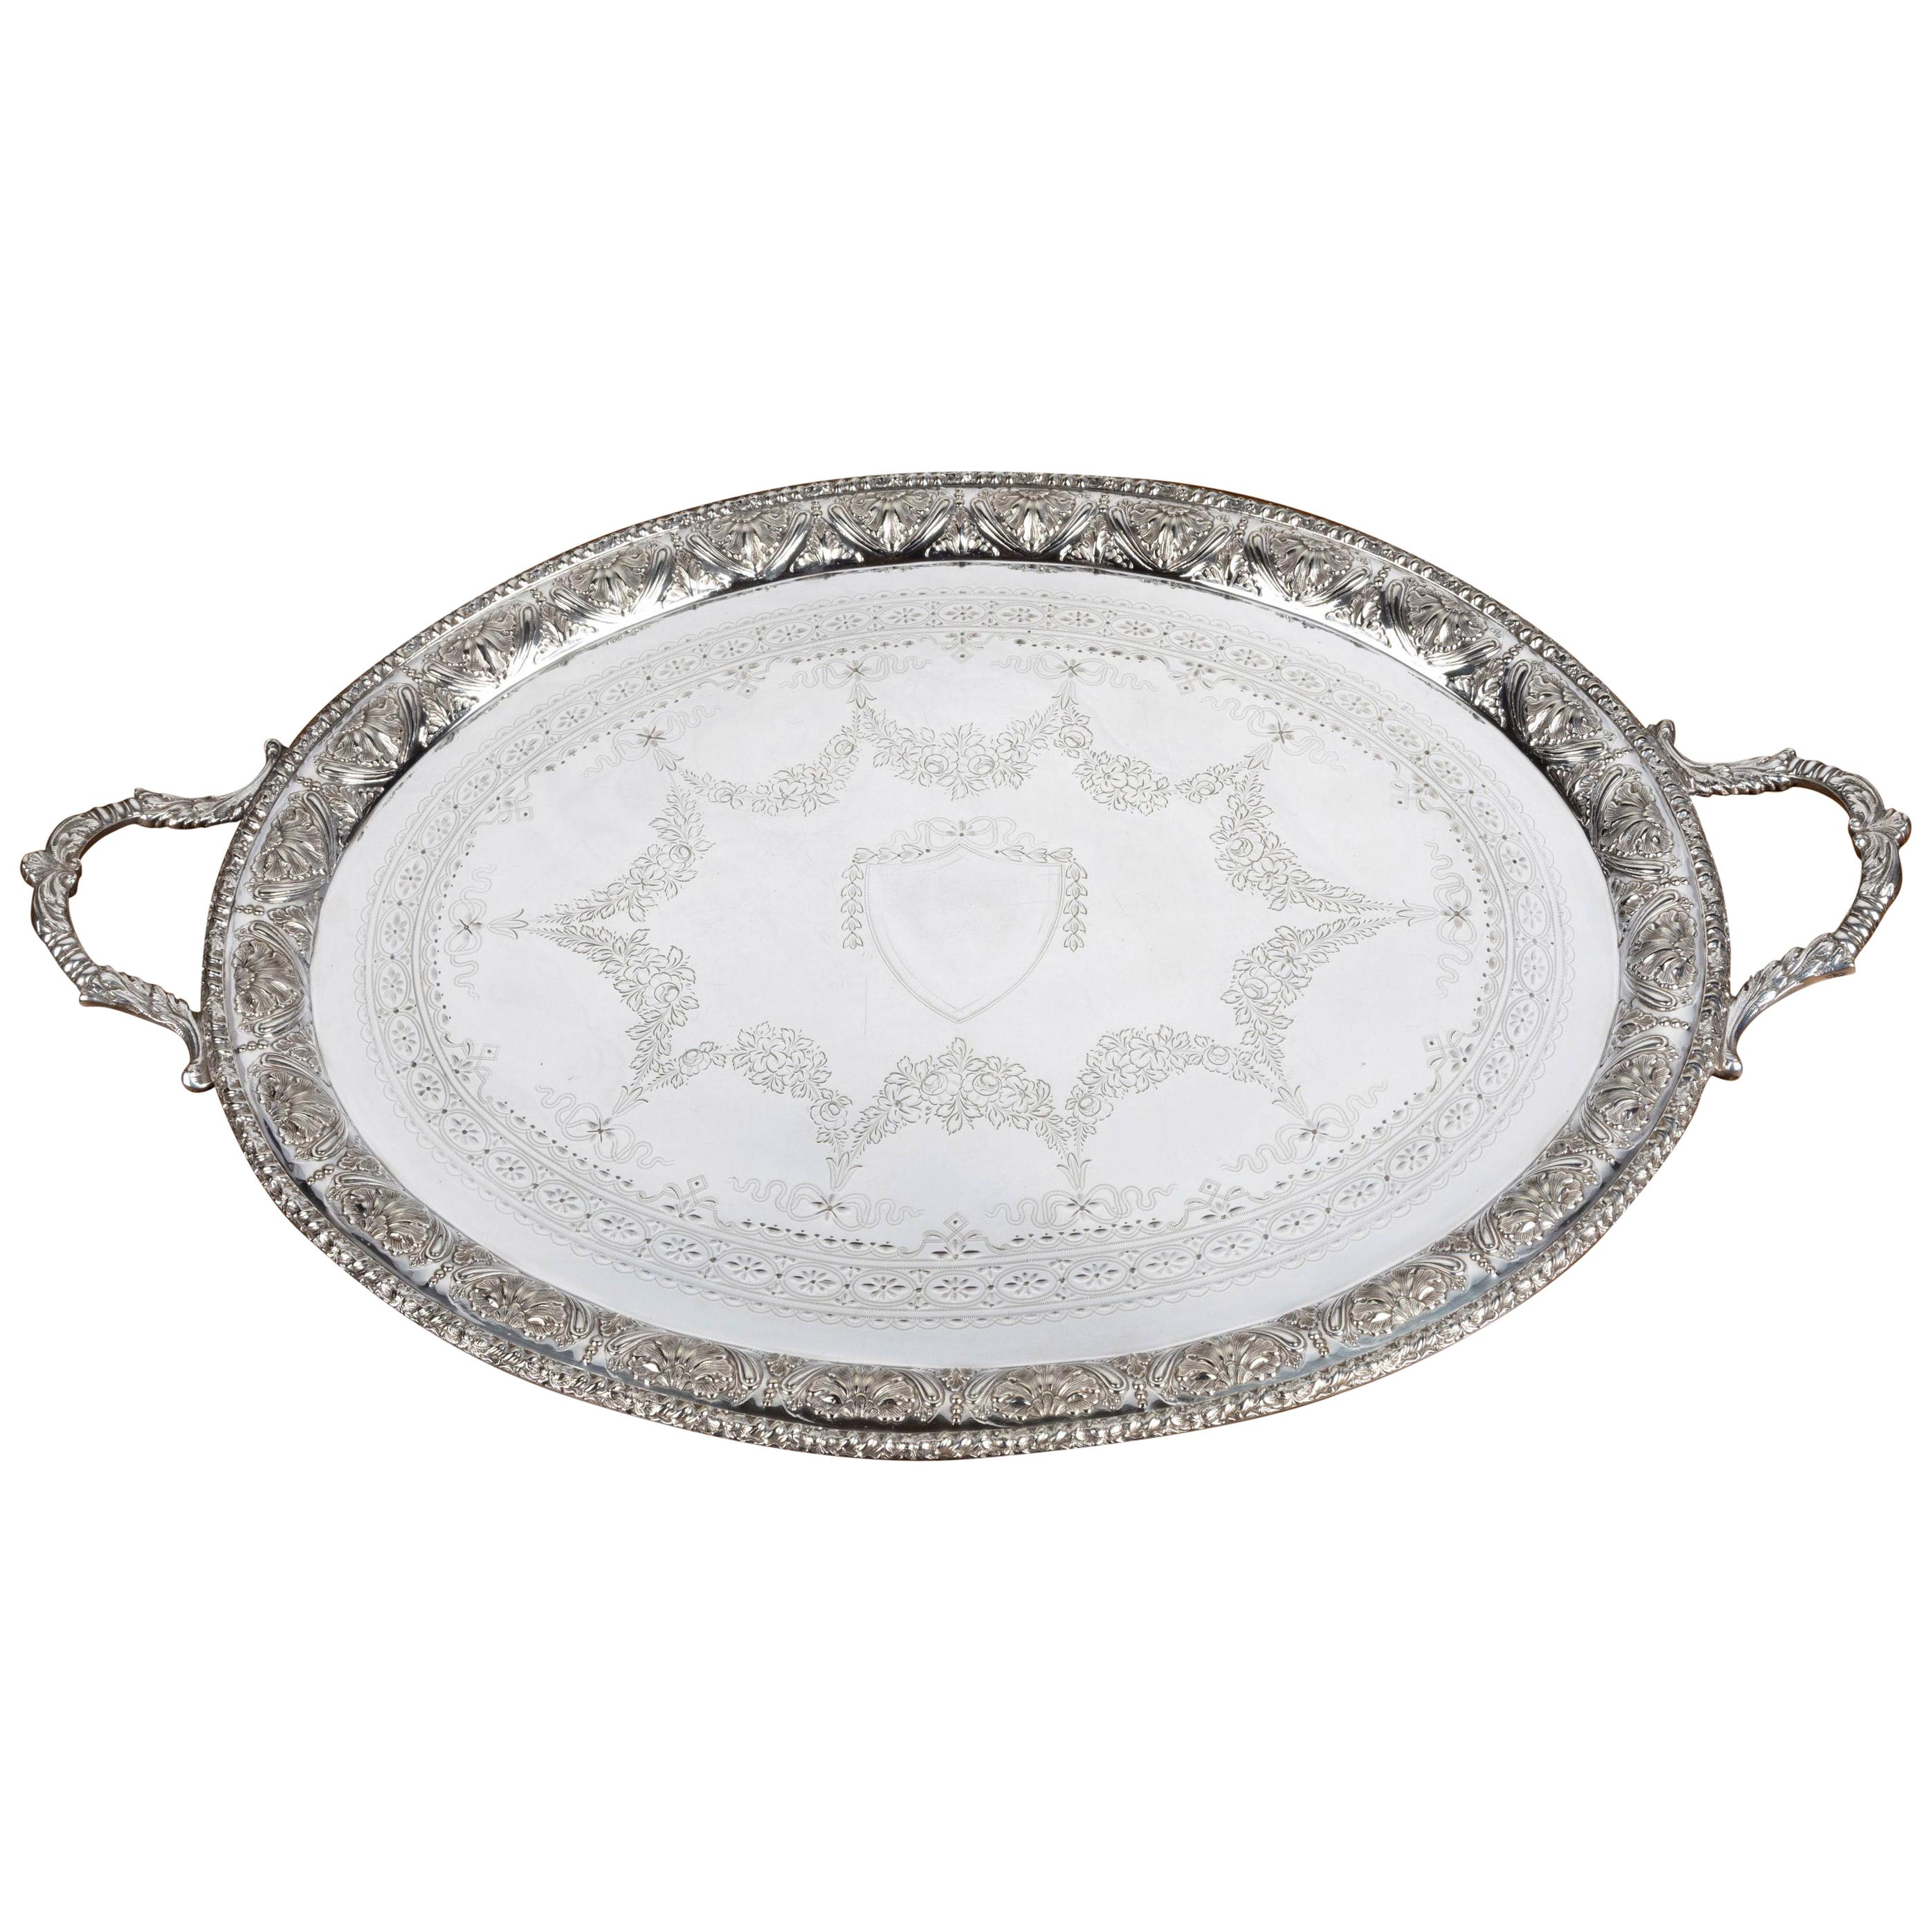 Very Good Quality Early 20th Century Oval Tray